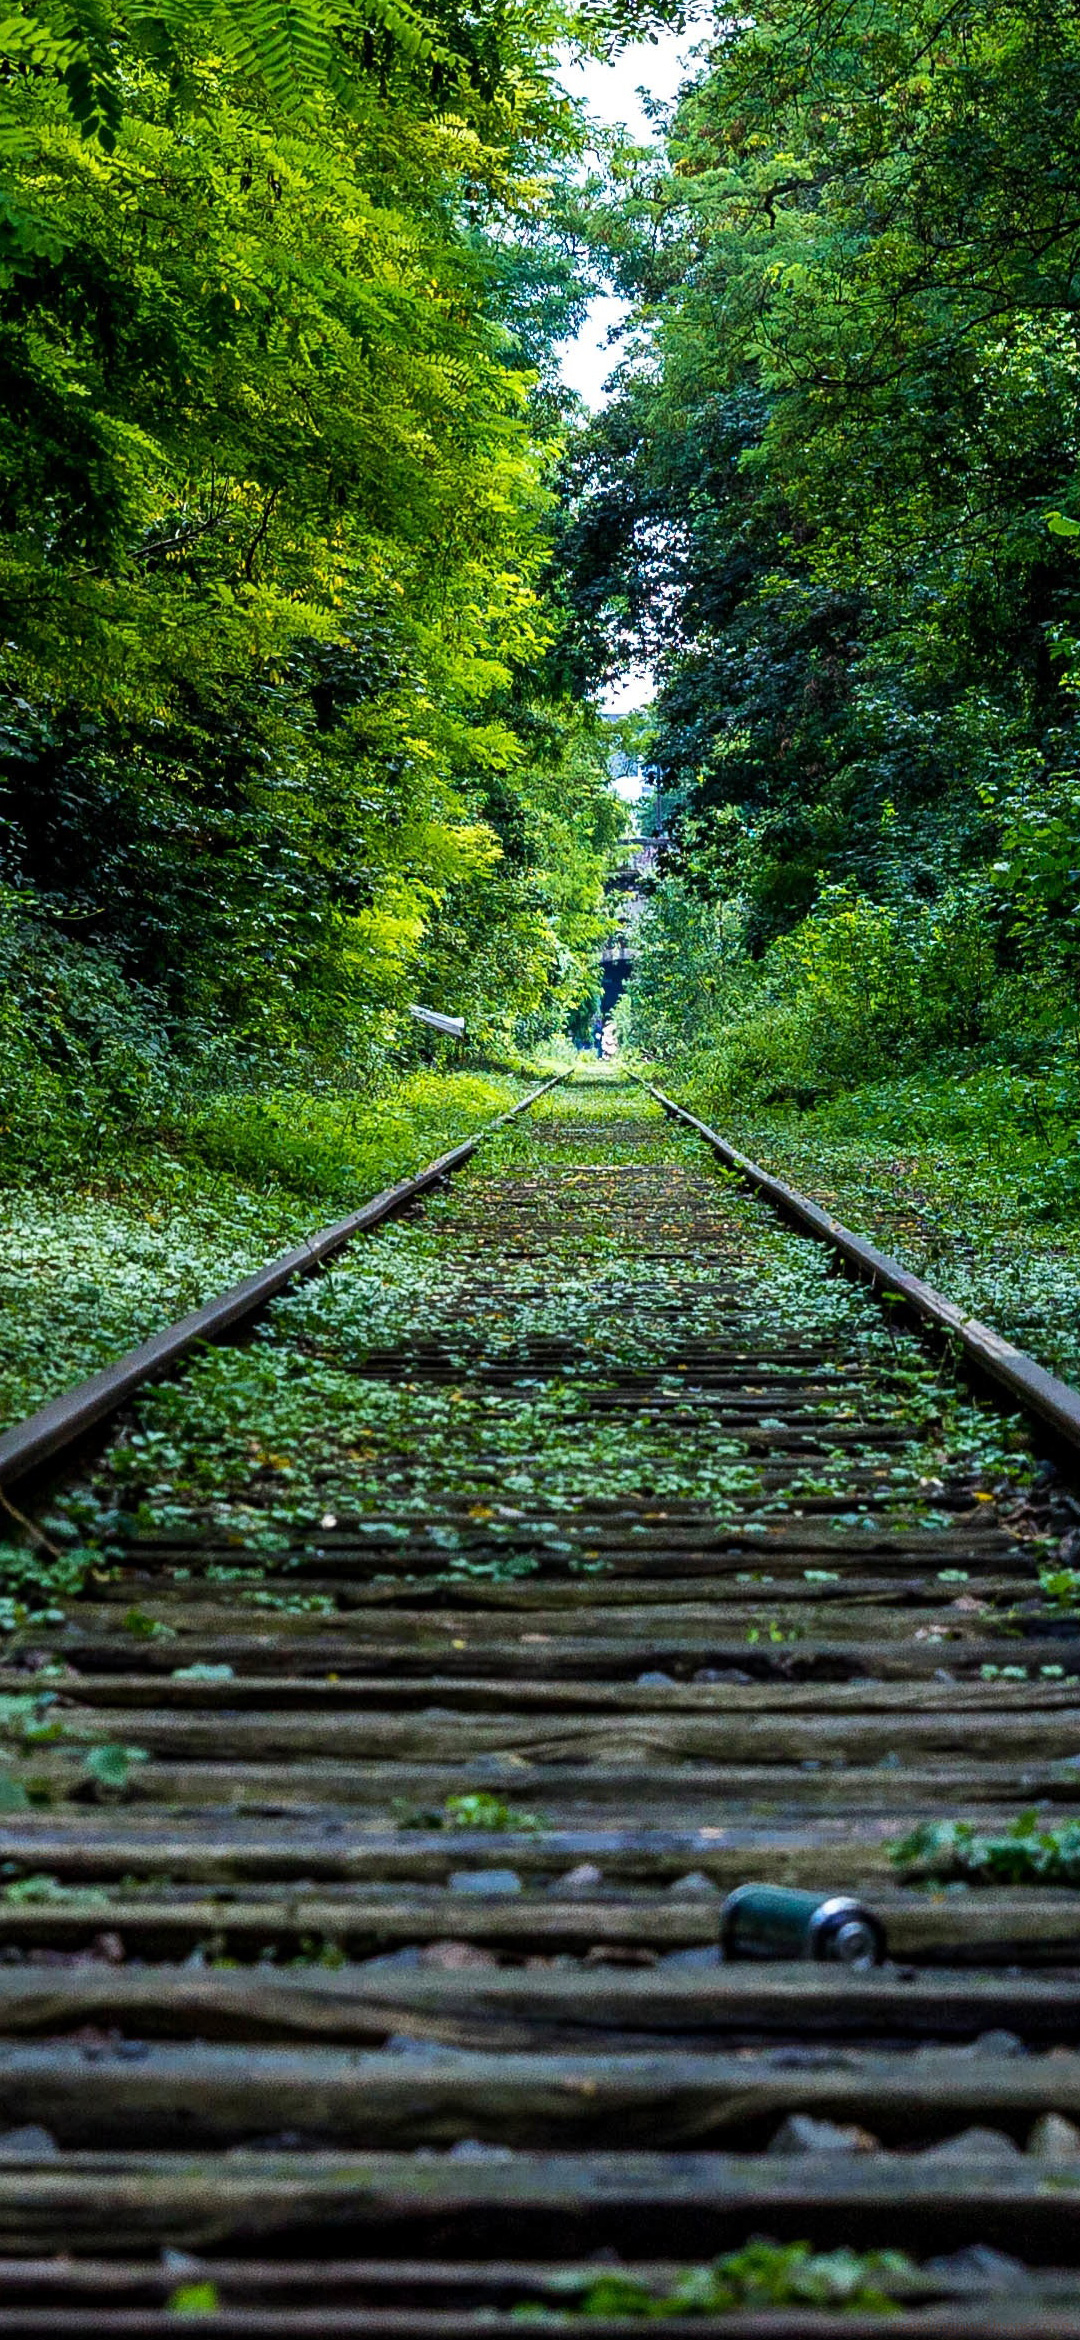 Railway Track In Forest Nature Wallpaper For Mobile Wallpaper Railroad HD Wallpaper